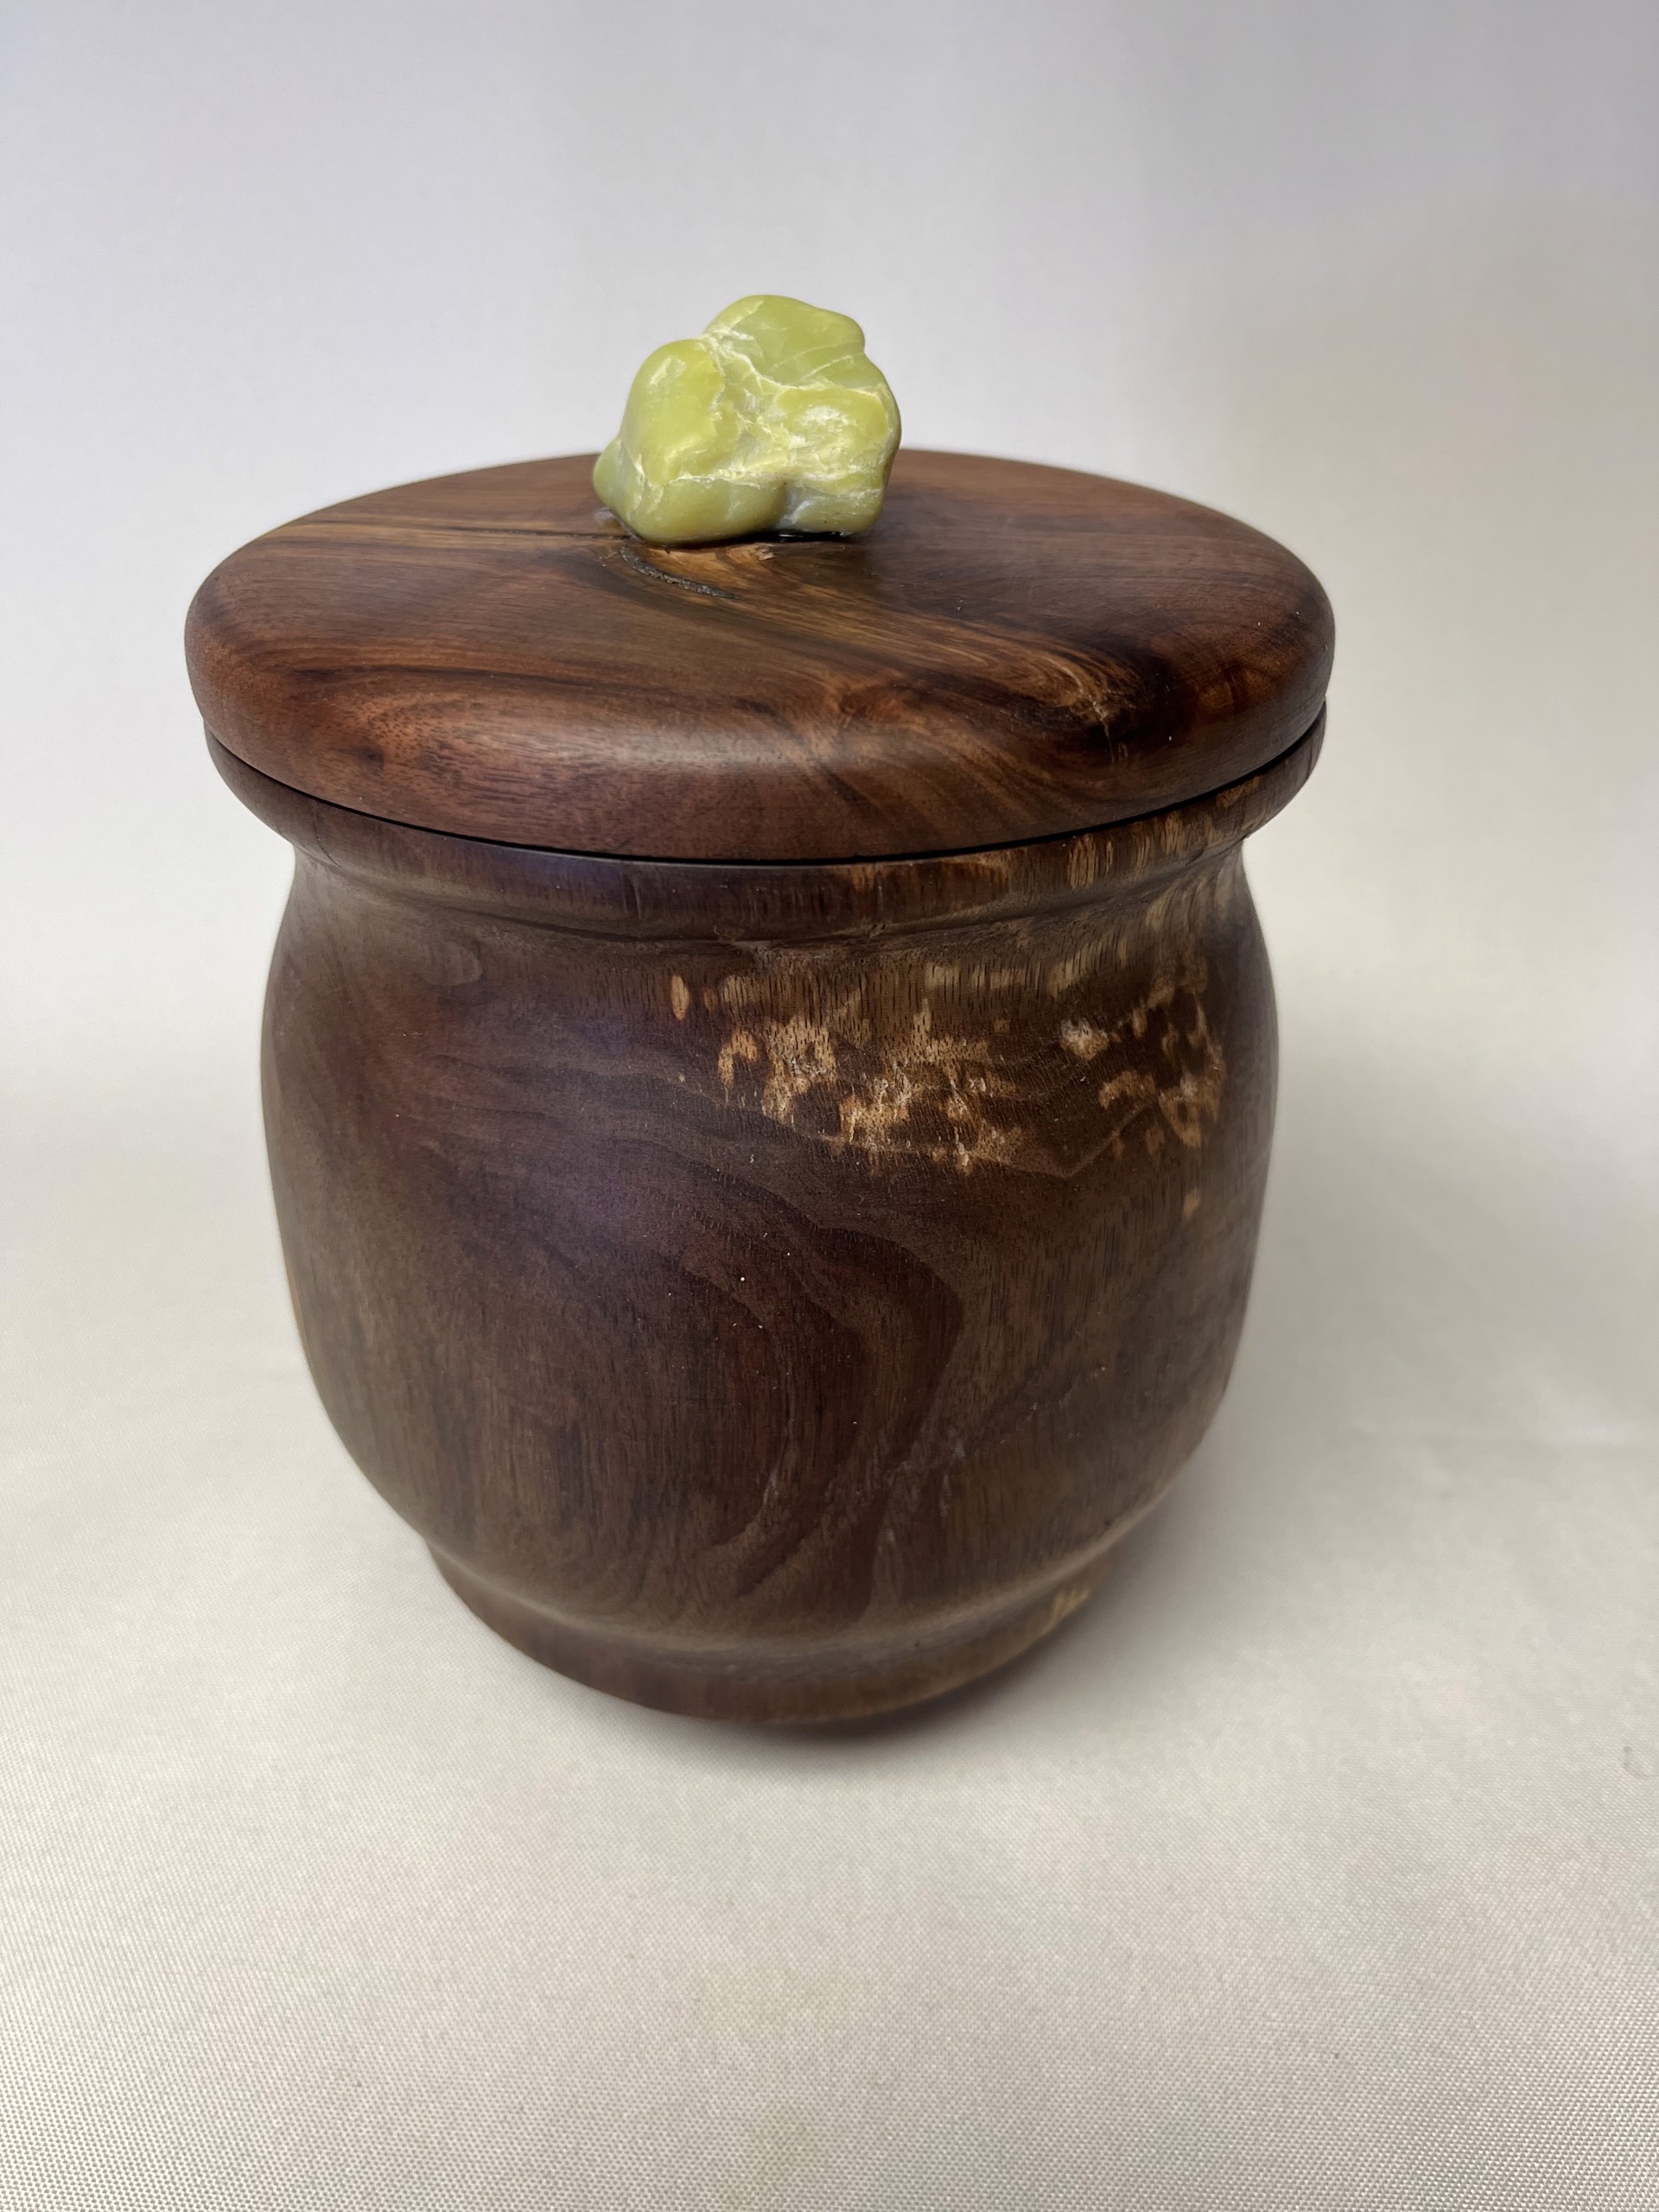 Turned Wood Jar W/Lid #22-21 by Rick Squires